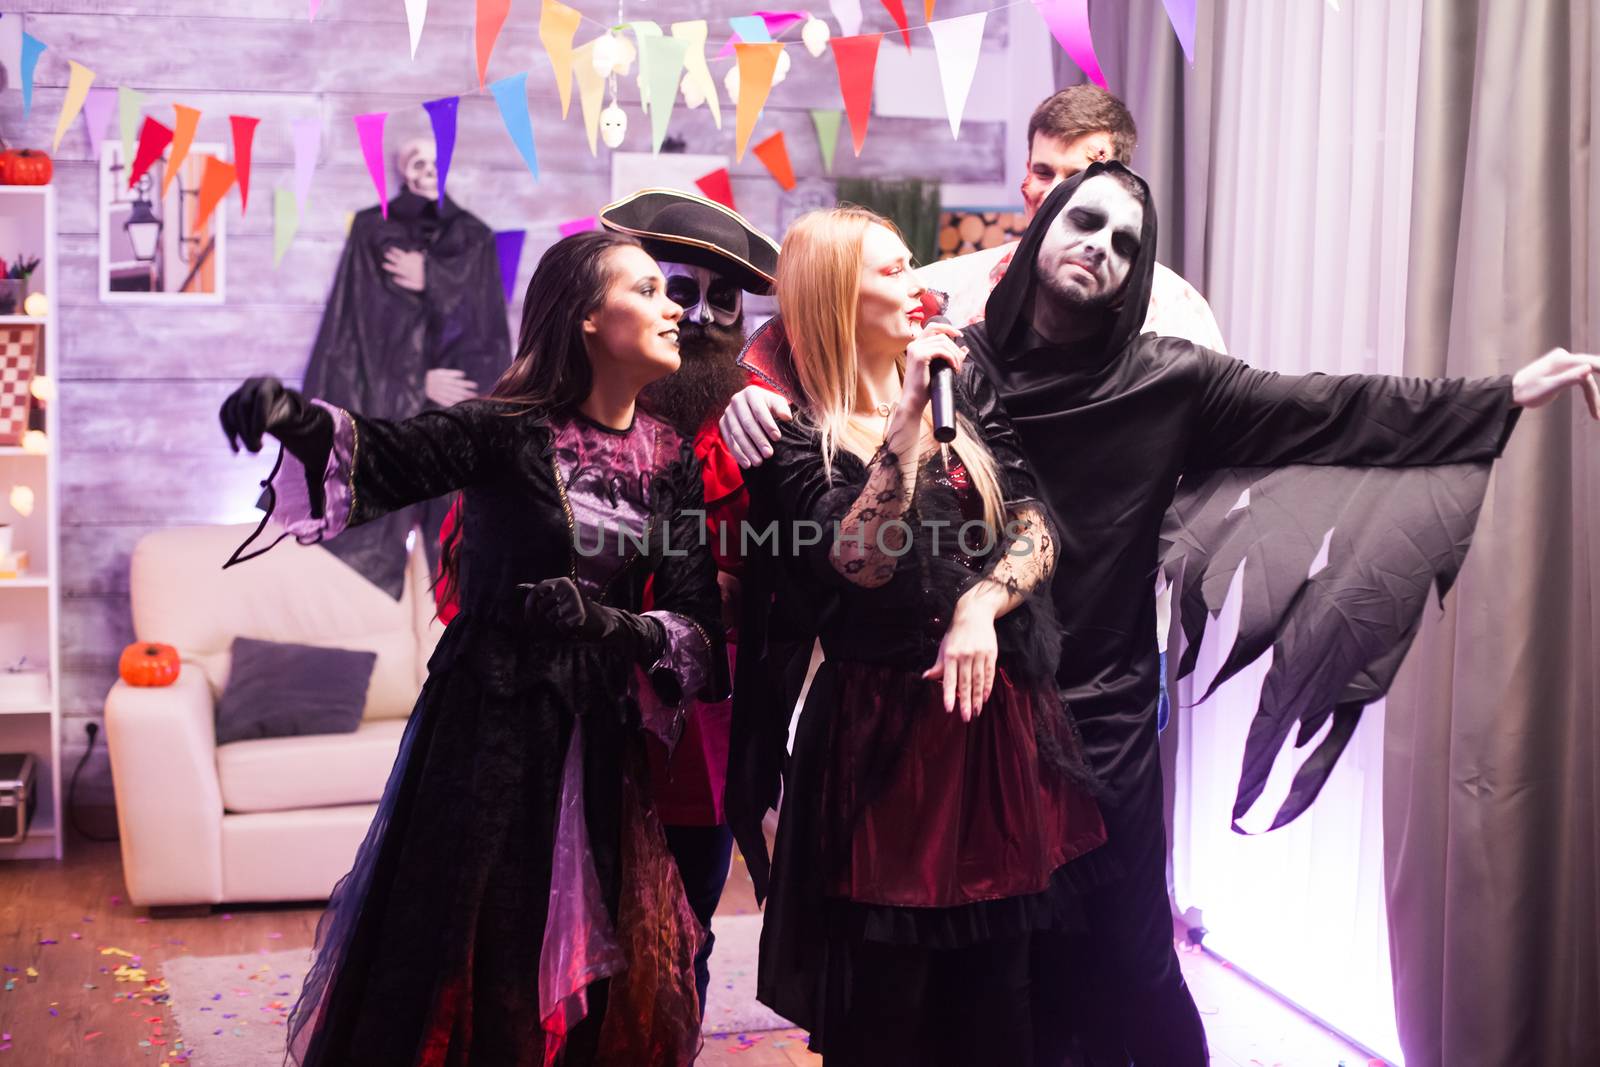 Attractive vampire woman singing at a halloween party with her friends.